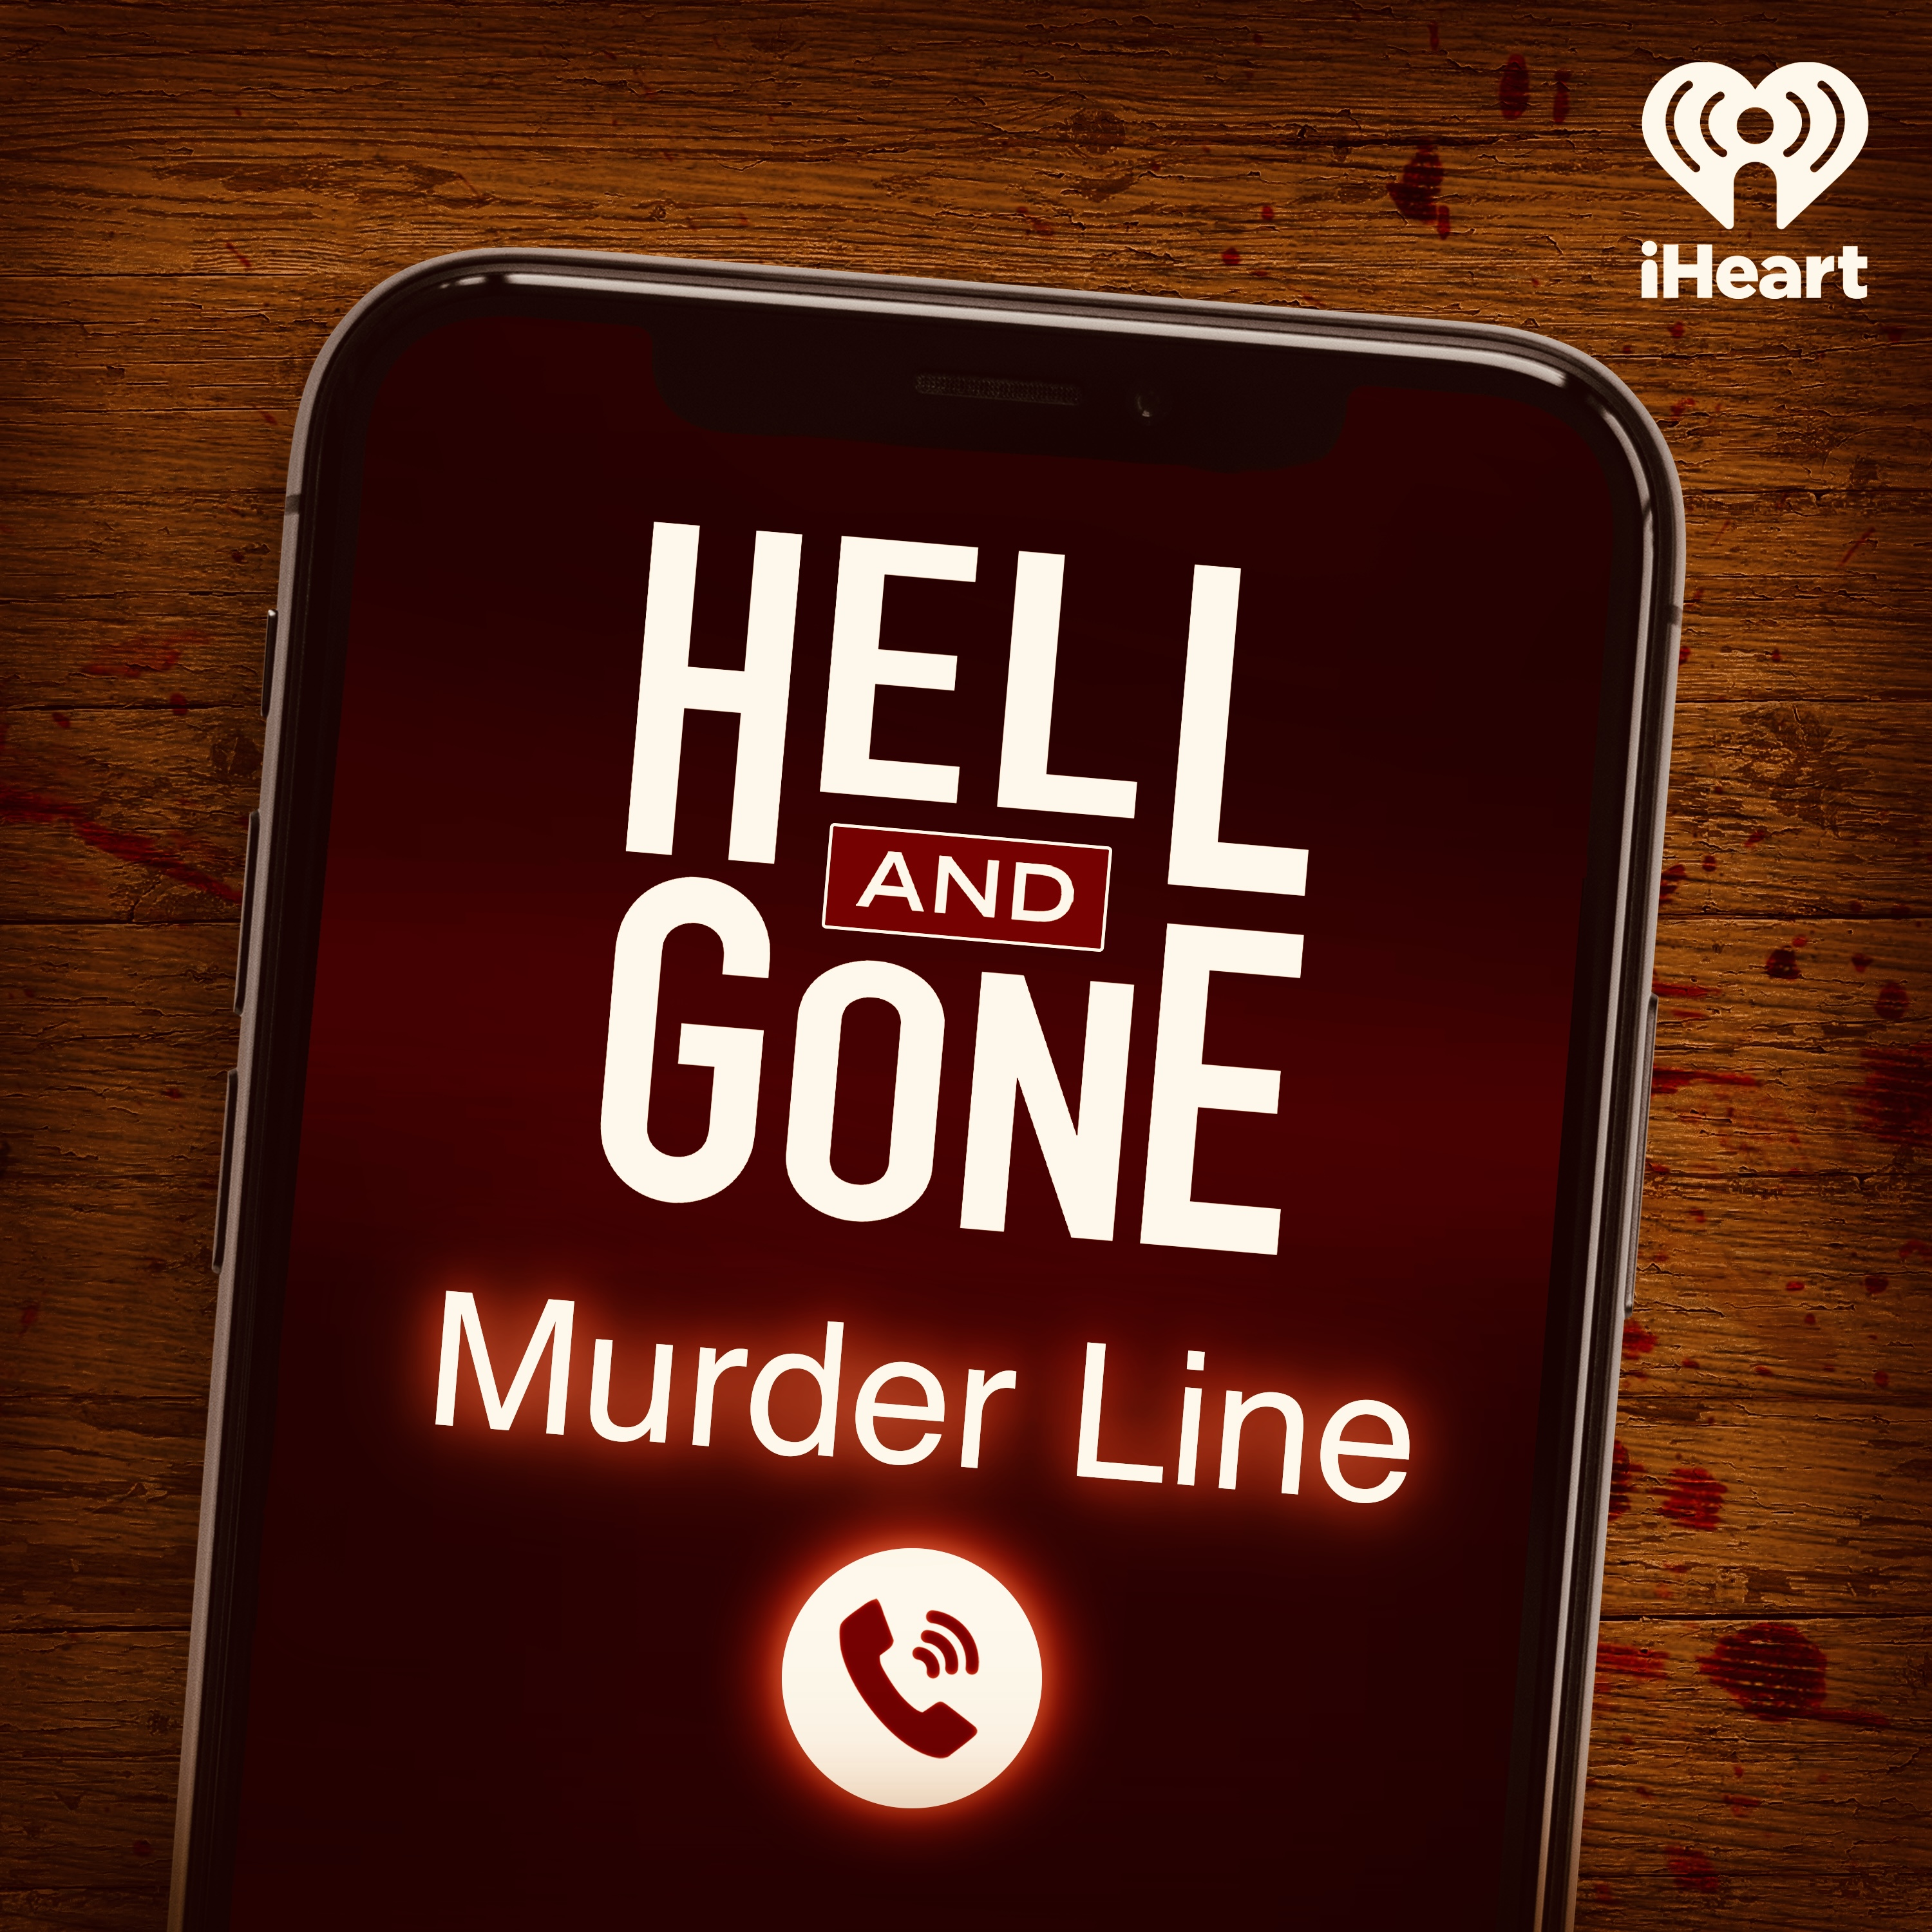 Hell and Gone Murder Line: Jason Lierl Part 2